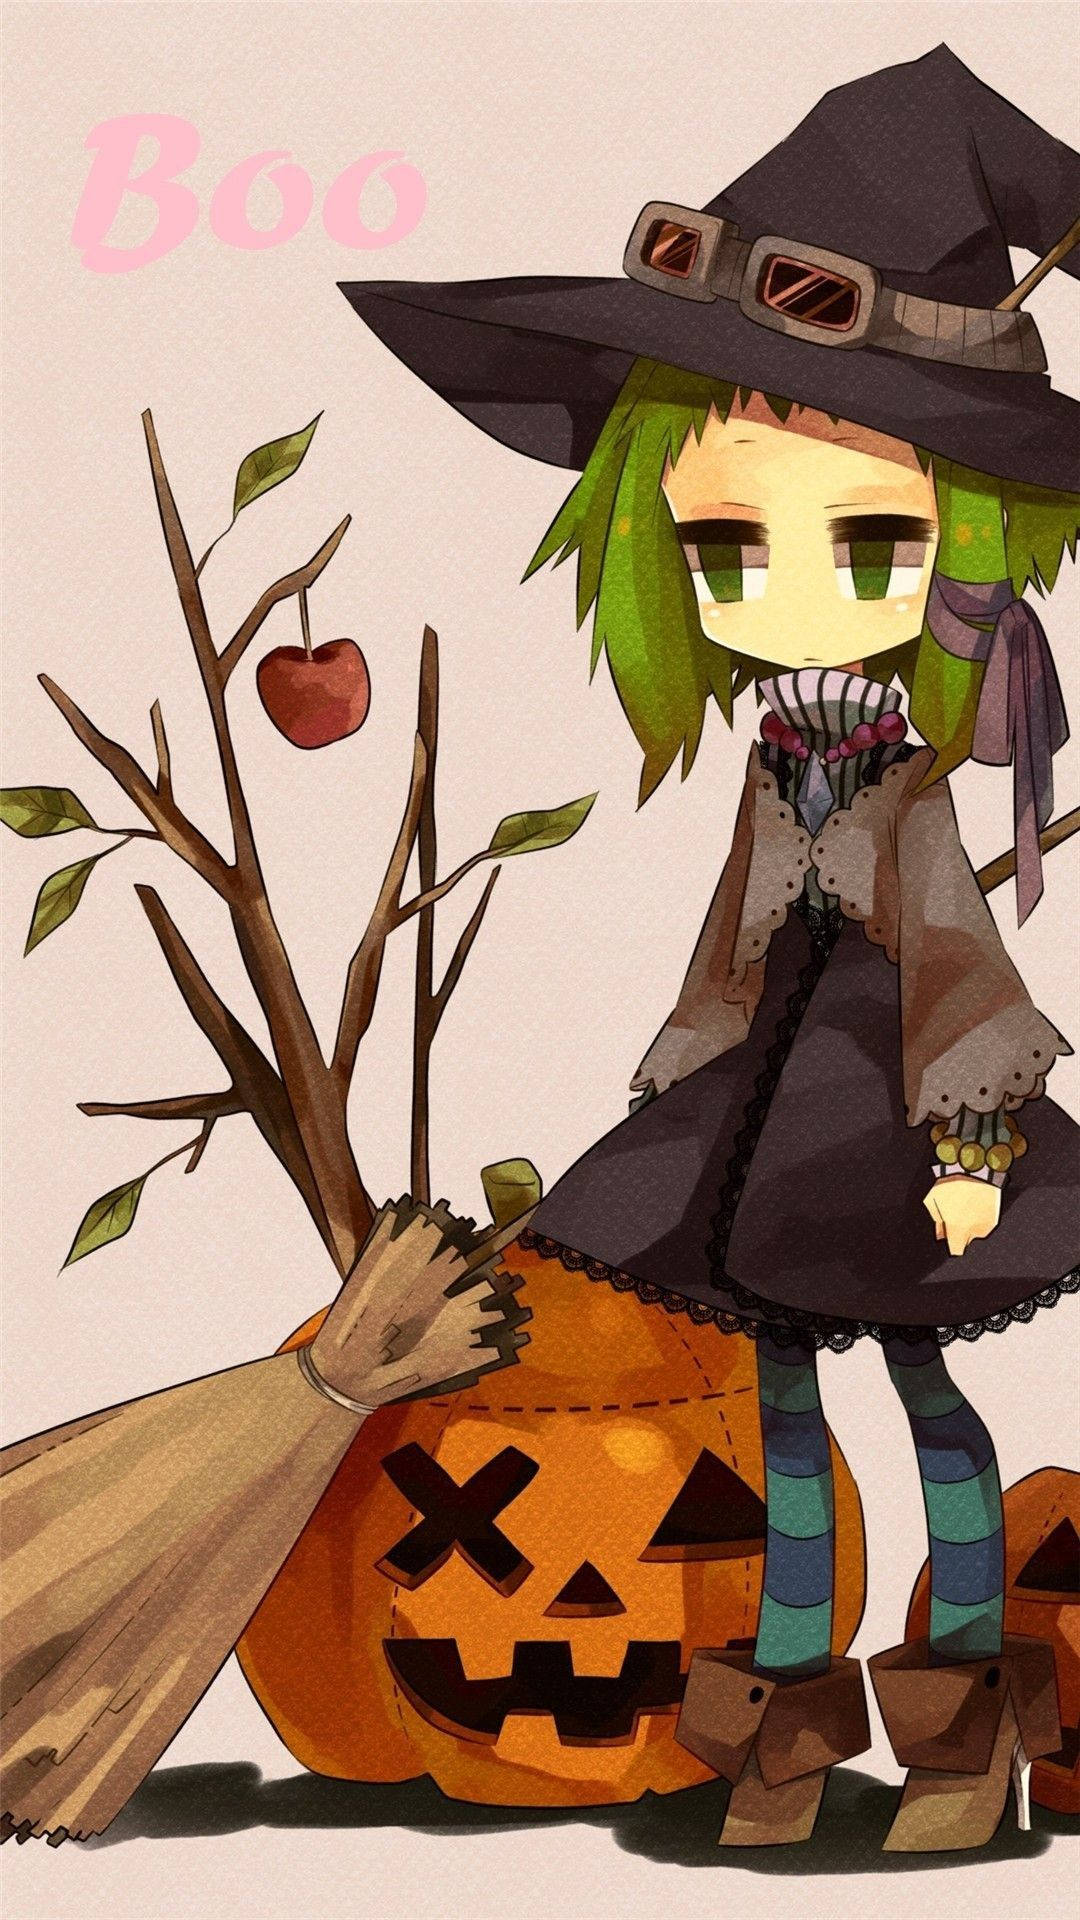 Get ready for an Anime-filled Halloween! Wallpaper